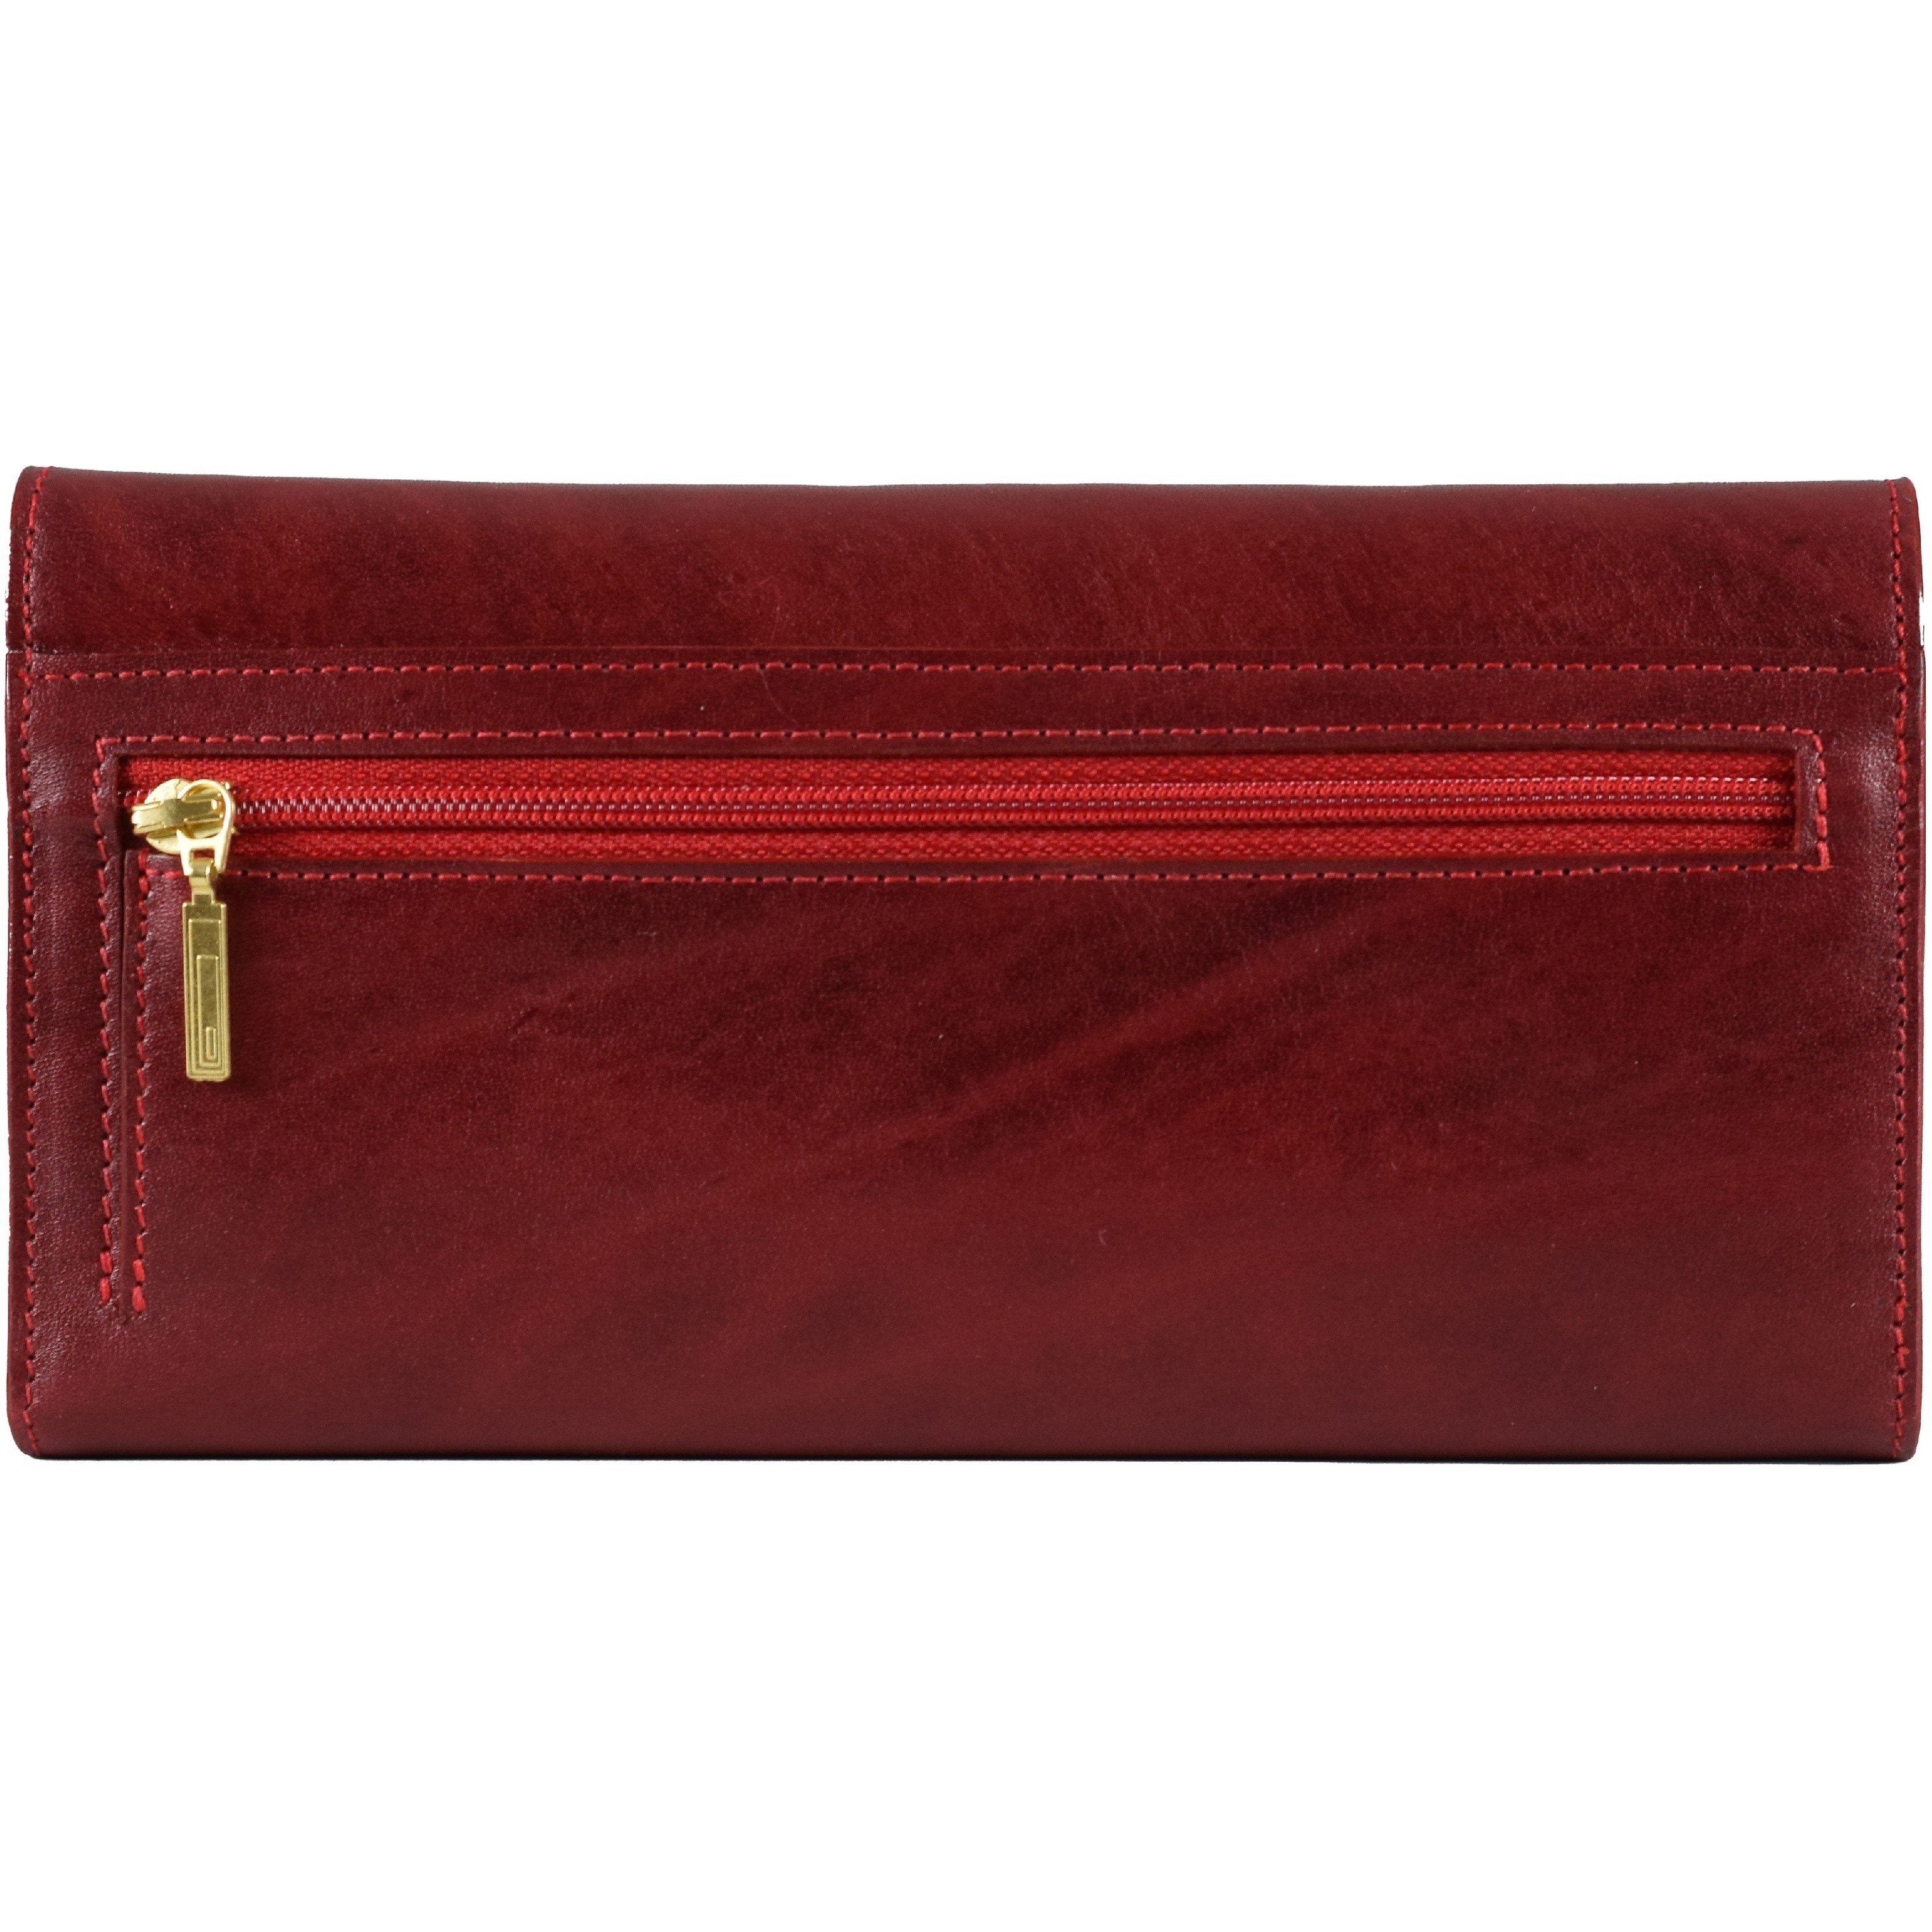 Limited Ladies Wallet - LAND Leather Goods